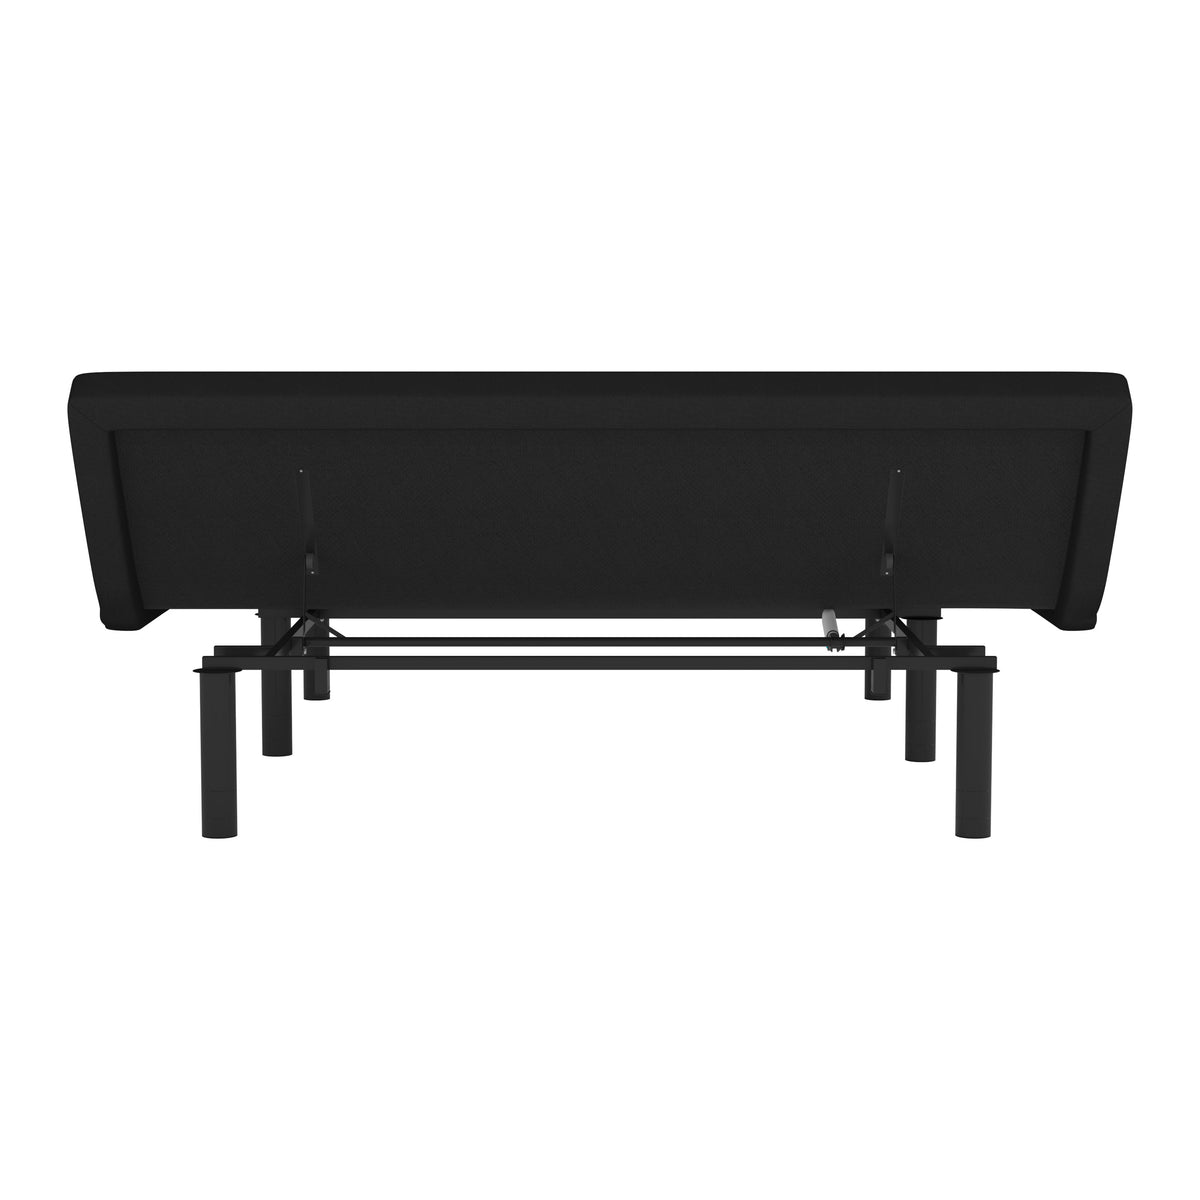 King |#| Anti-skid Black Upholstered Adjustable Bed Base with Wireless Remote-King